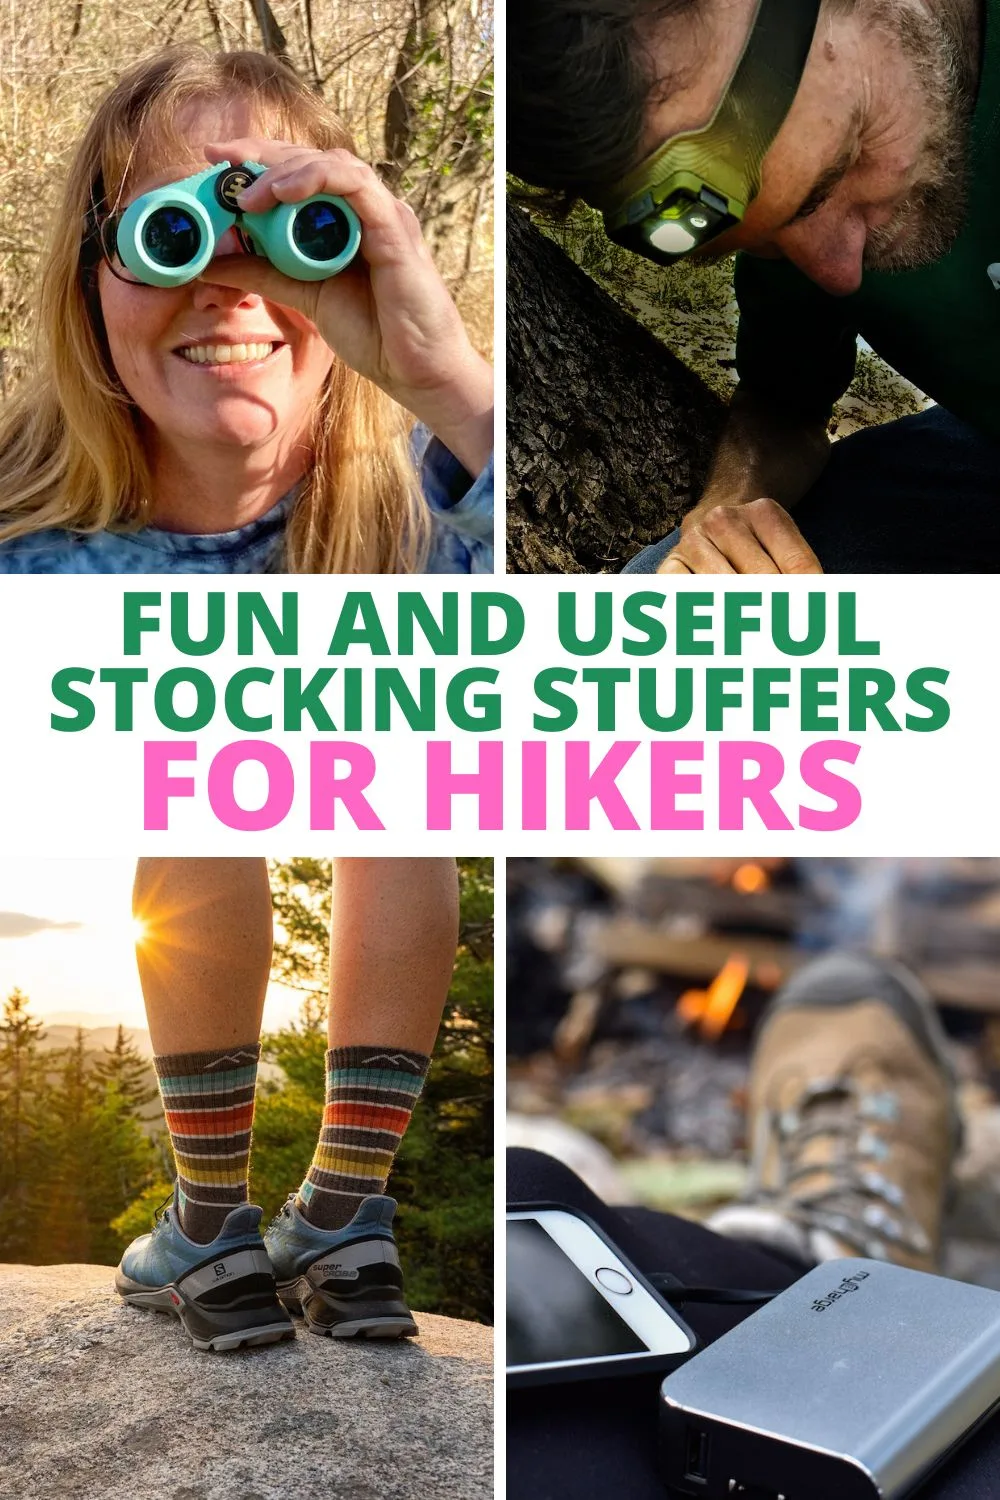 A collage featuring our favorite stocking stuffers for hikers - portable charger, wool socks, binoculars, and a head lamp.